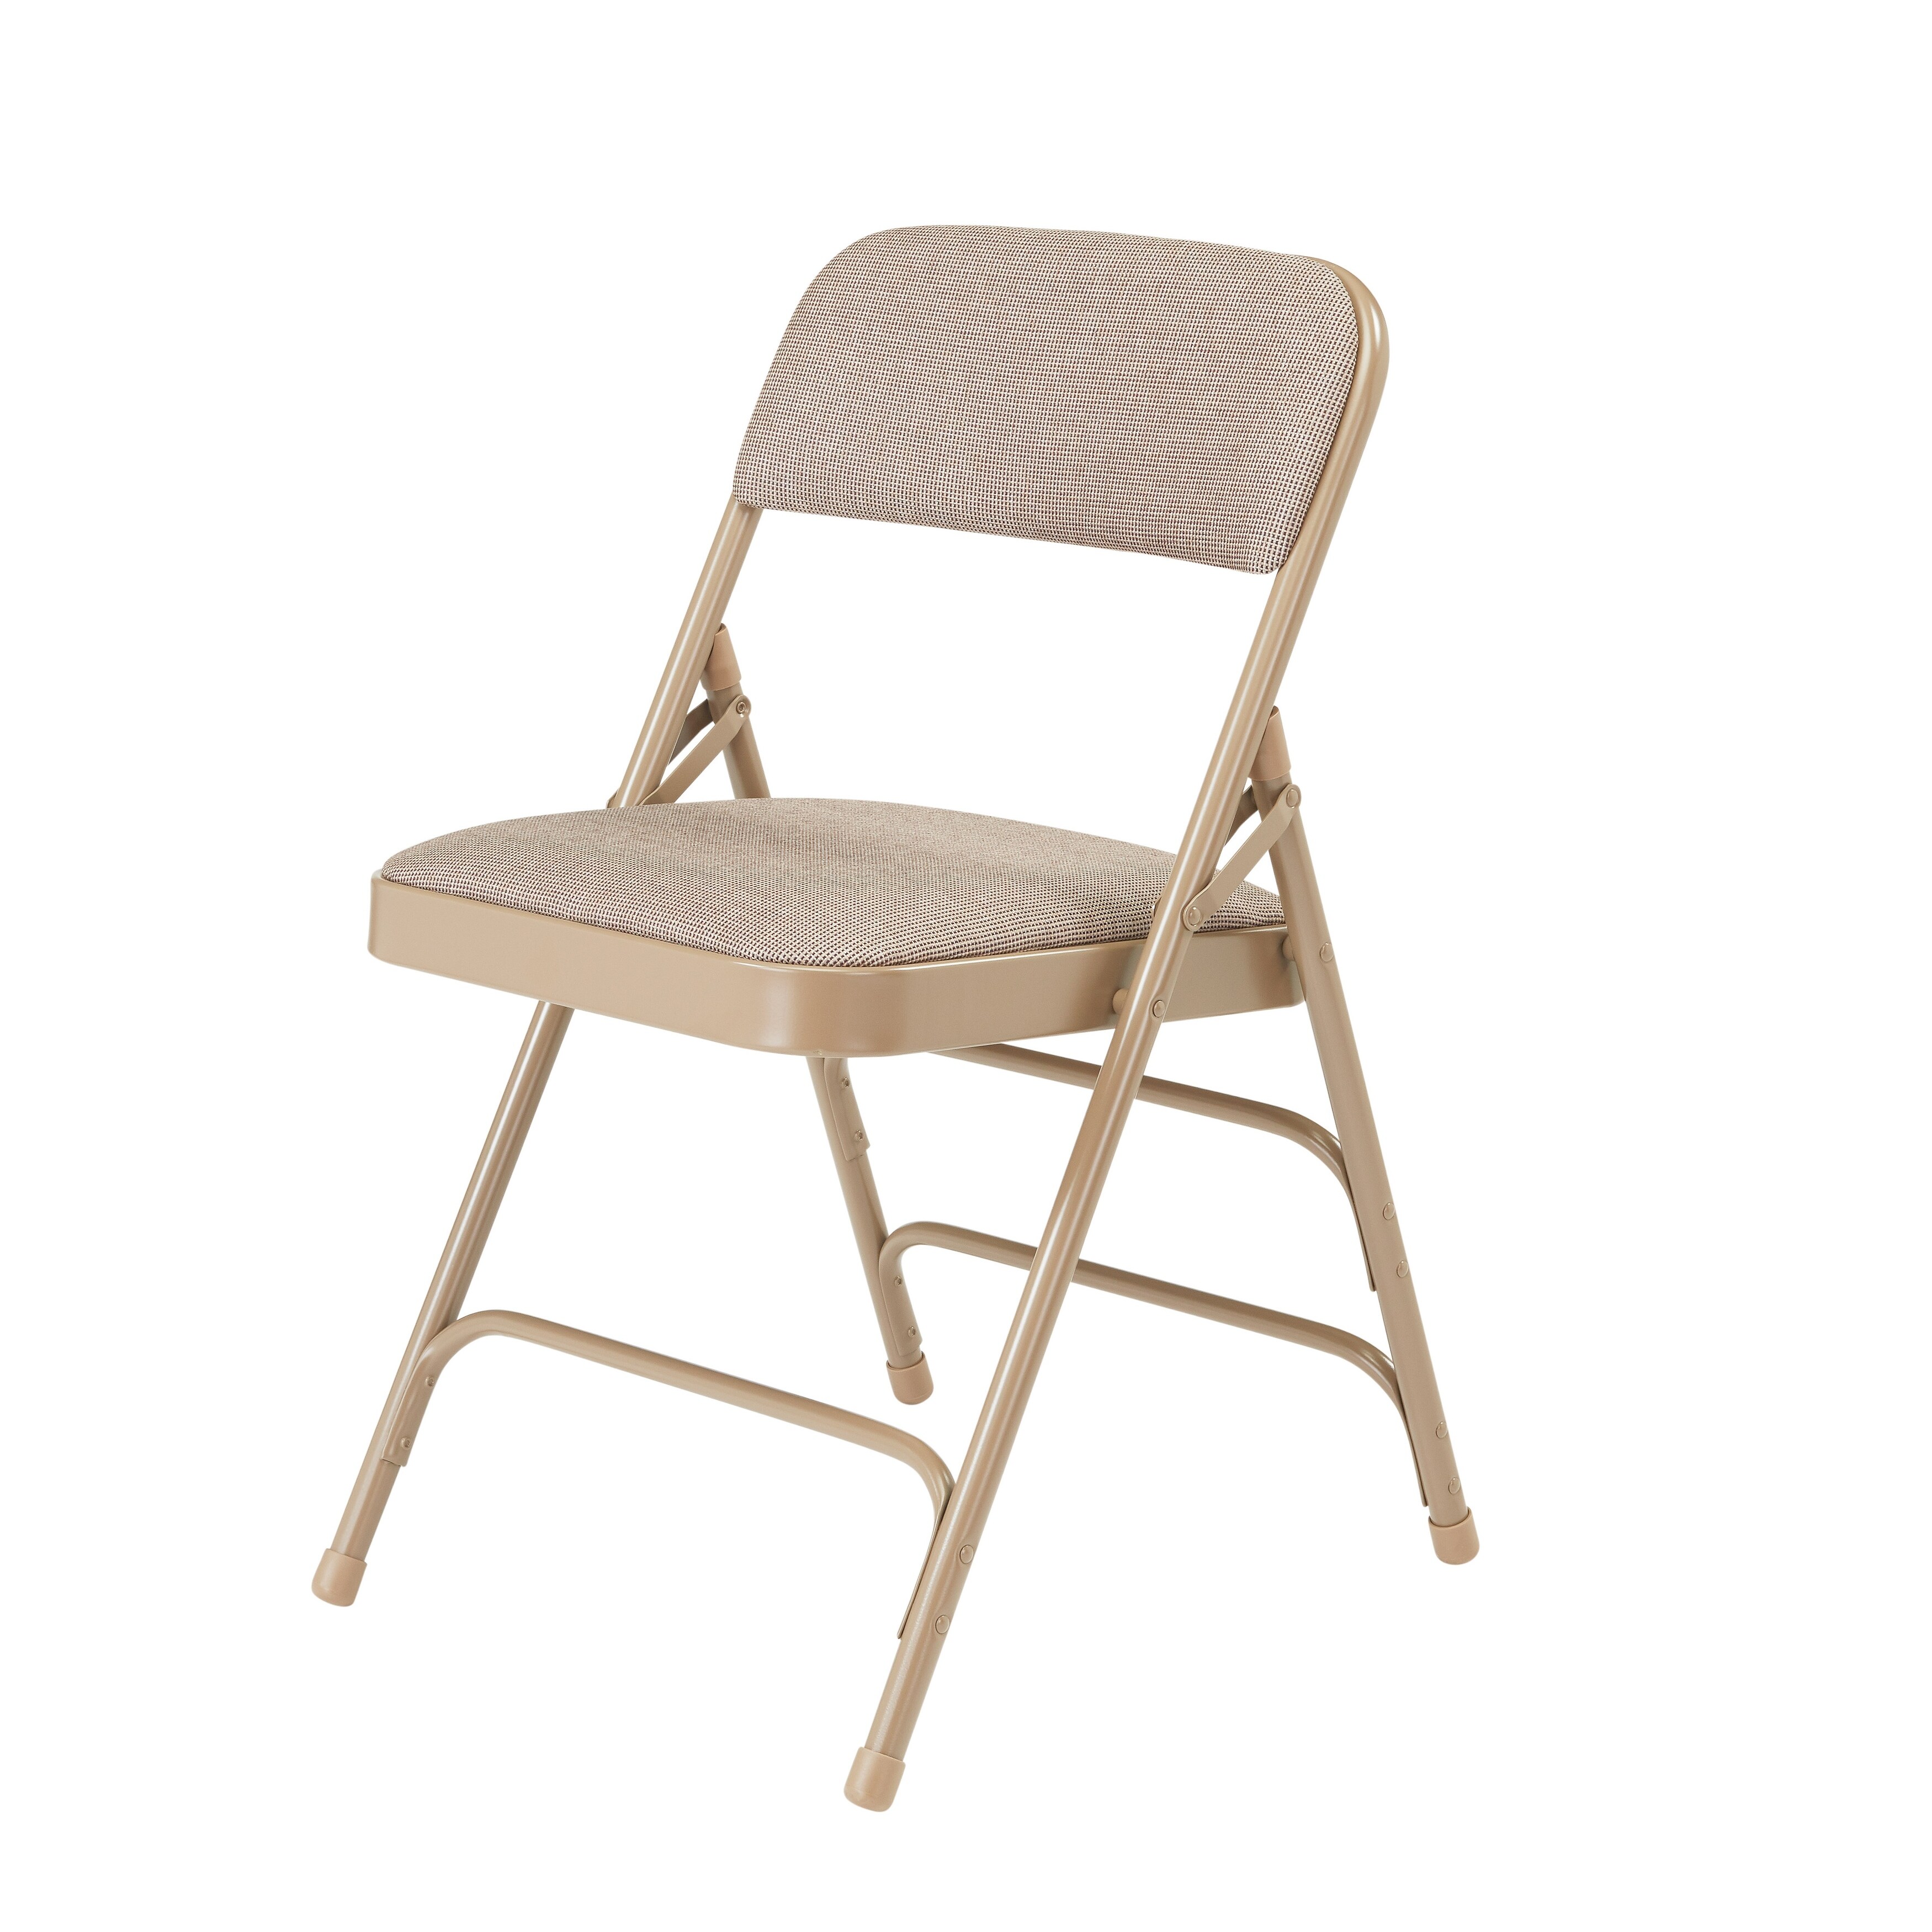 https://ak1.ostkcdn.com/images/products/is/images/direct/b560046972ed8987a2ce93f630bc4388b029dbb2/NPS-Fabric-Upholstered-Premium-Reinforced-Folding-Chairs-%28Pack-of-4%29.jpg